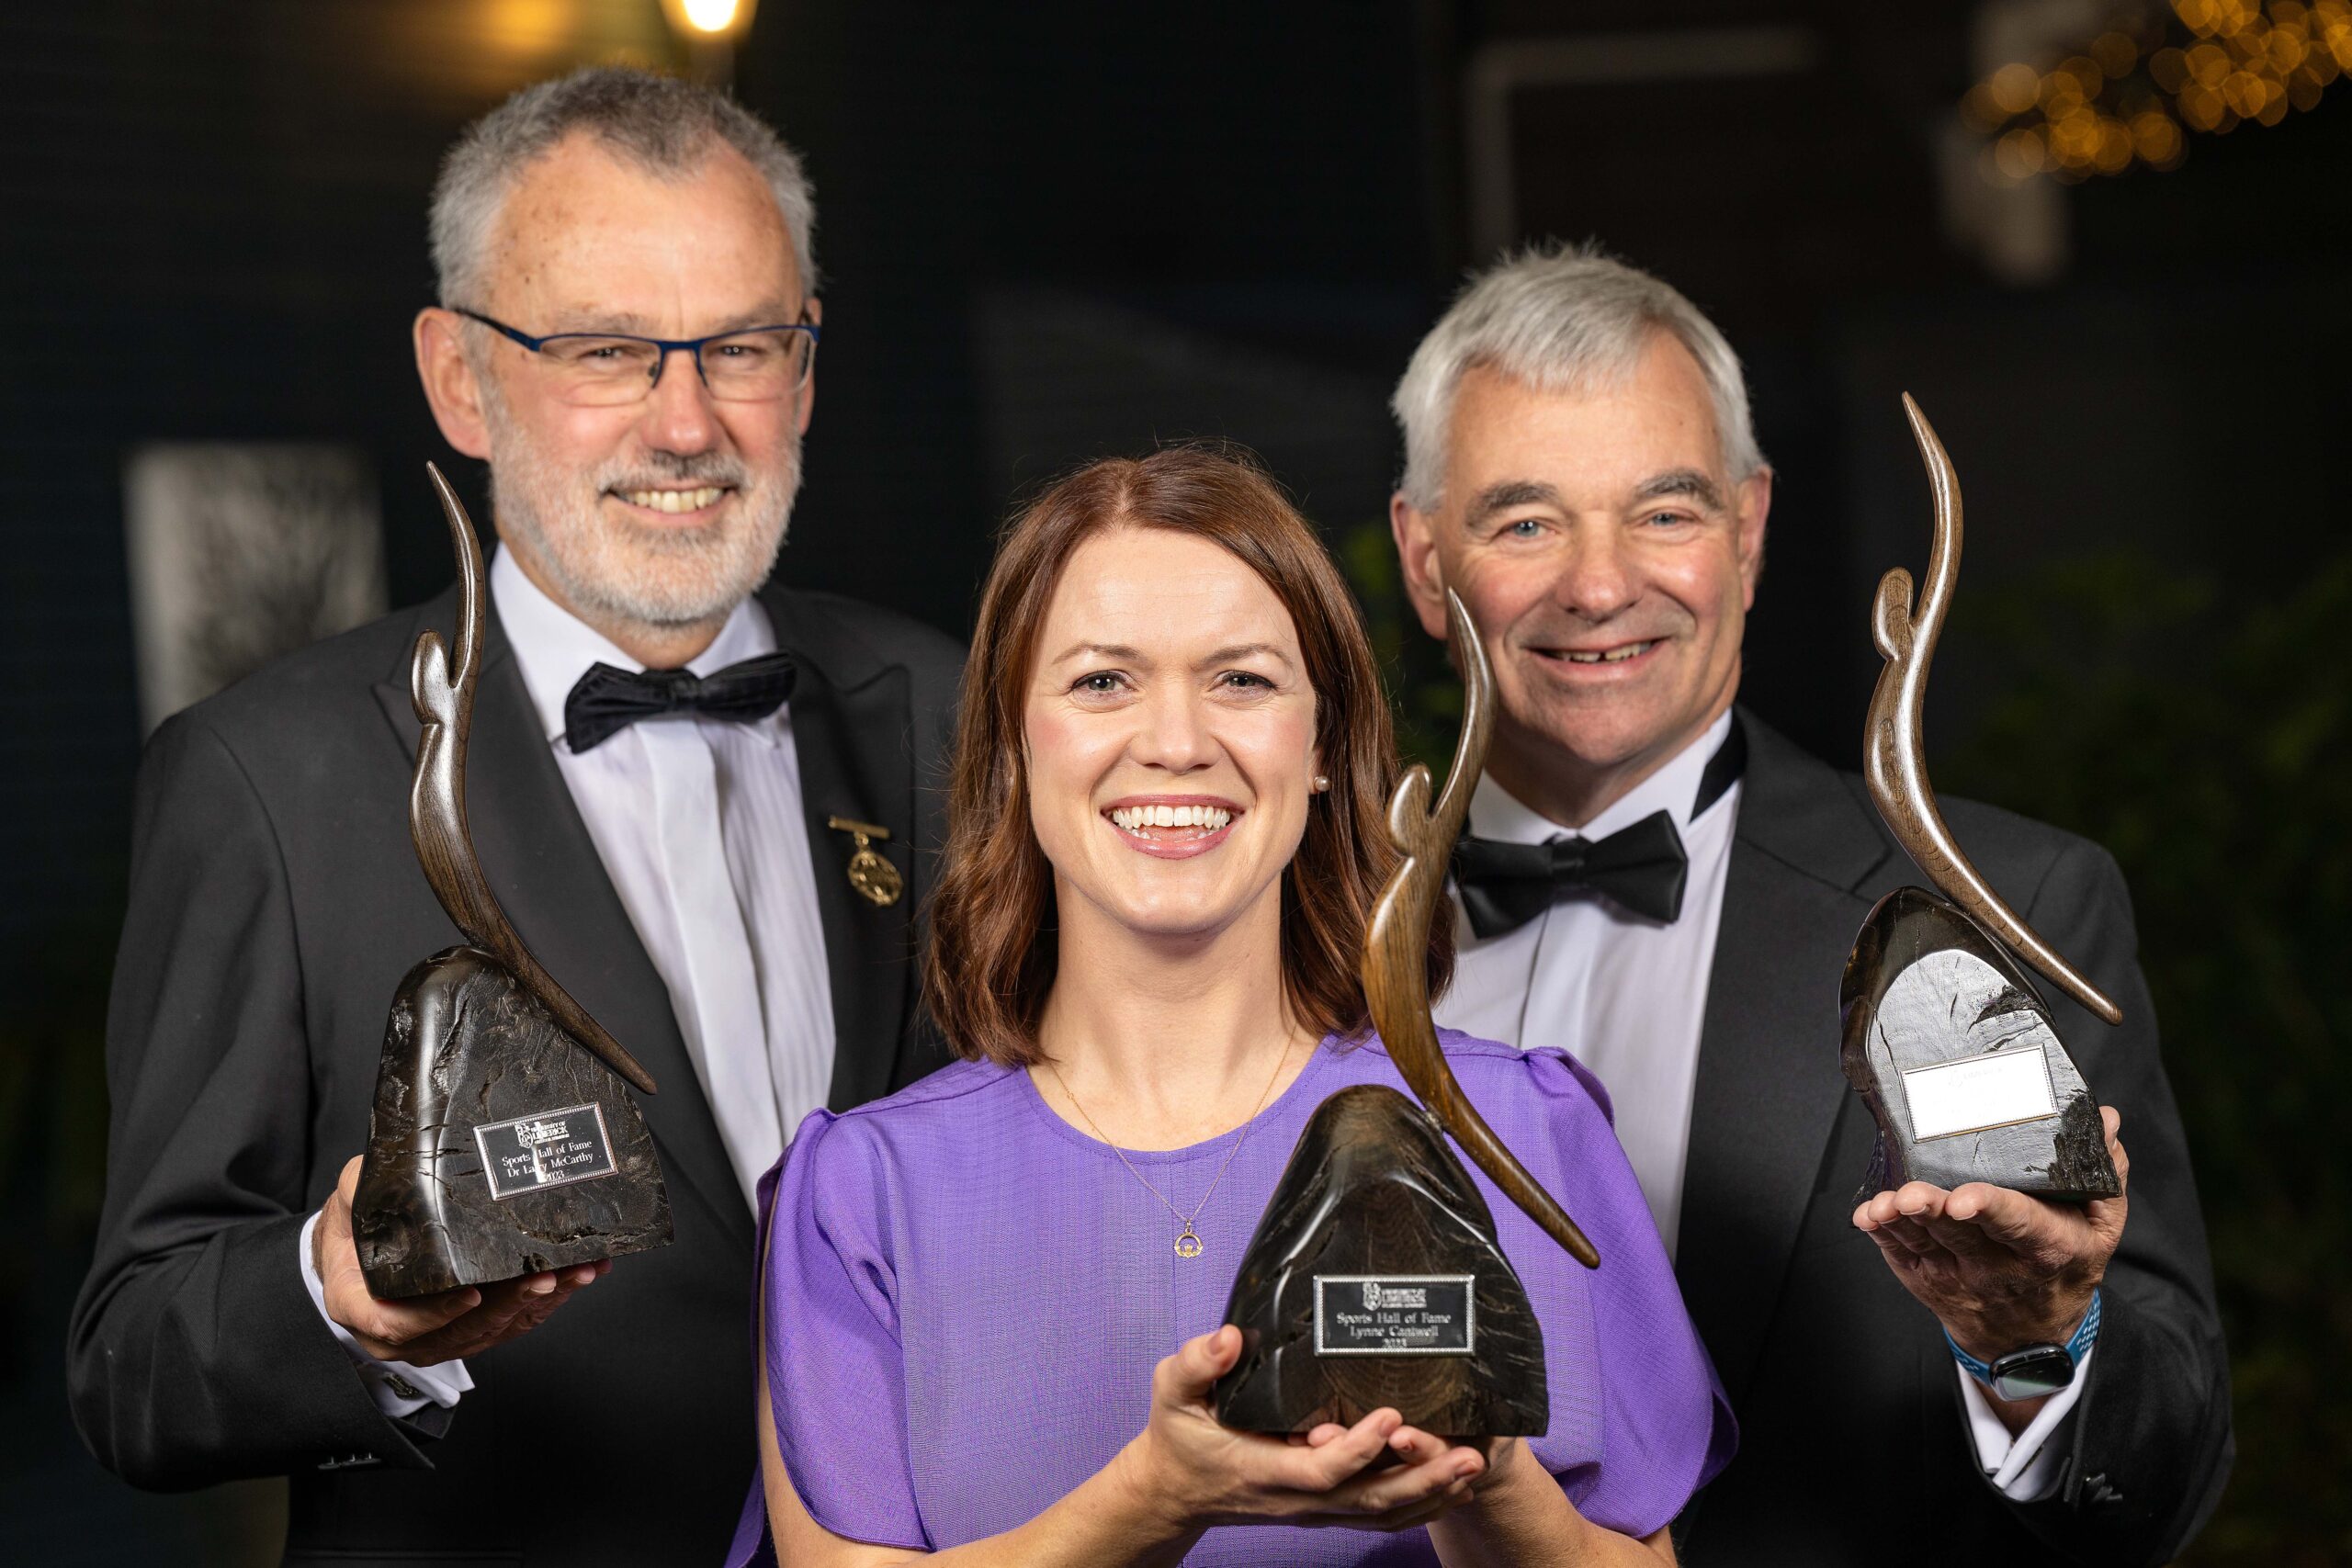 2023 UL Alumni Awards and Sports Hall of Fame recognise ‘exceptional achievements and contributions’ of graduates